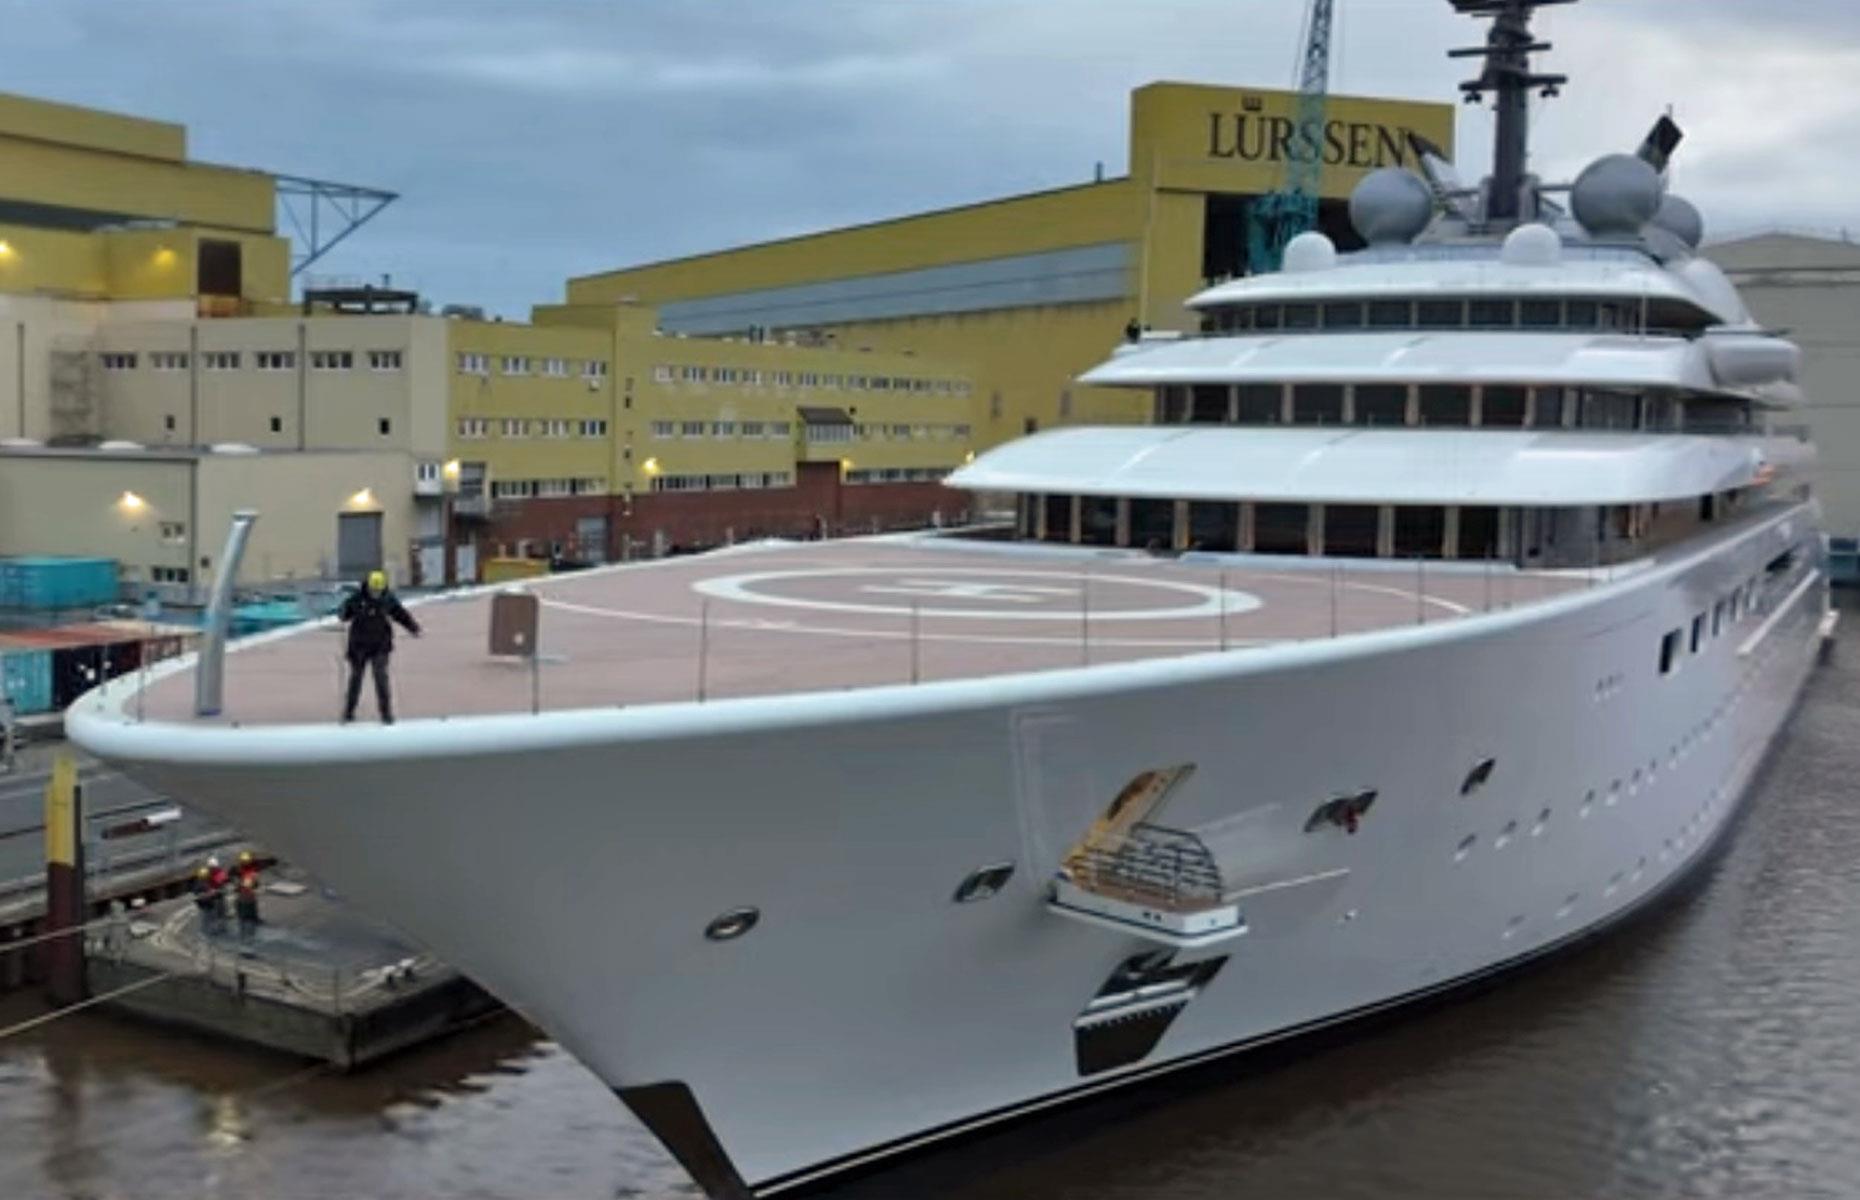 <p>The second-biggest of Lürssen's four superyachts expected to launch this year,<em> Project Deep Blue</em> may not be delivered to its owner until 2025, according to several expert forecasts.</p>  <p>Details about the project are scant. Even the final length of the superyacht is uncertain, but it's believed to measure at least 427 feet.</p>